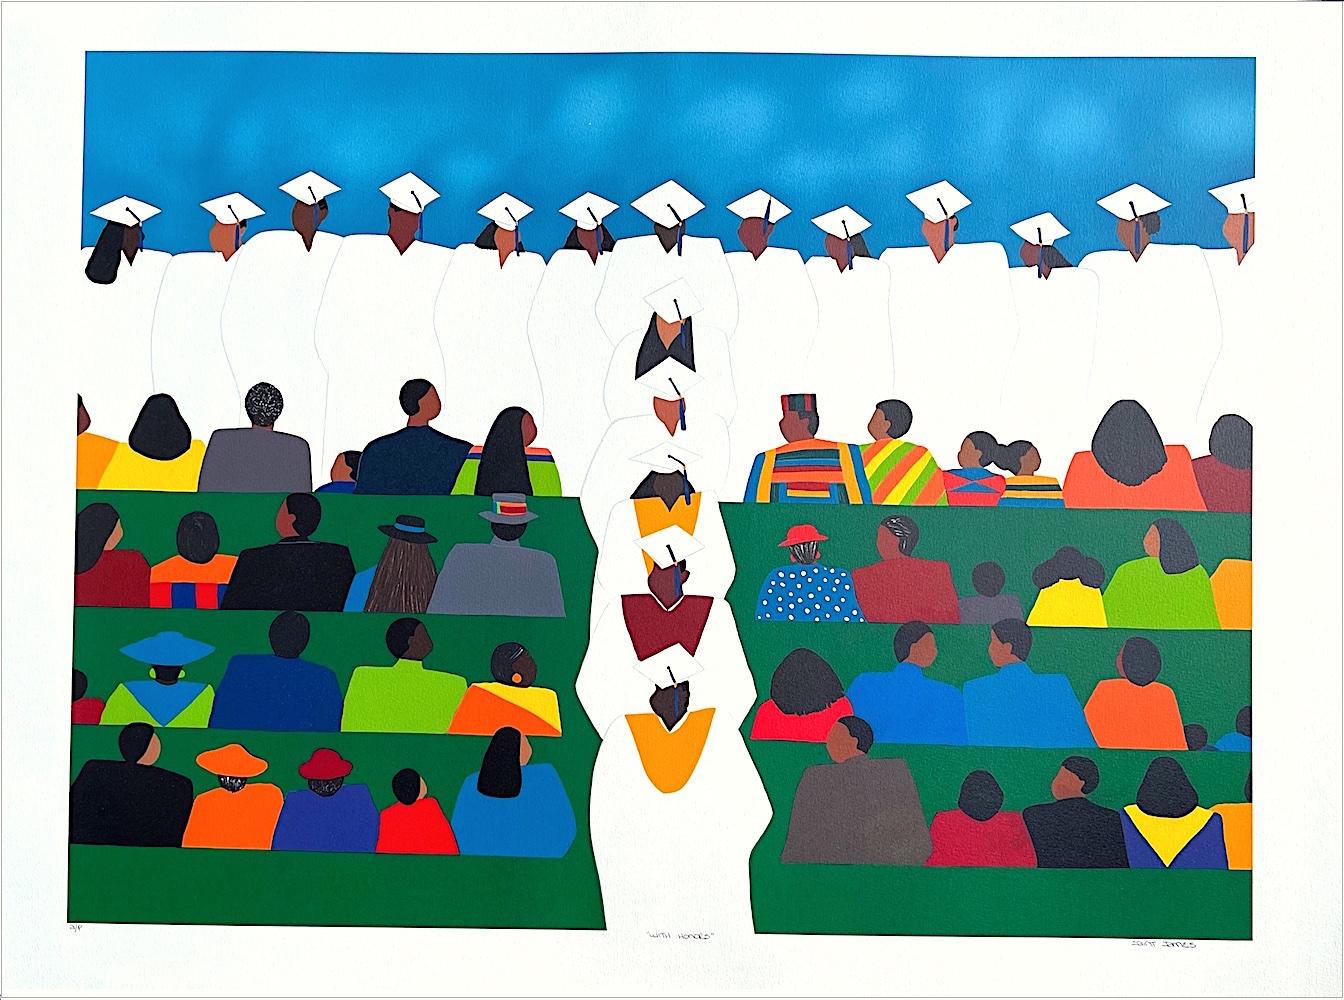 WITH HONORS Signed Lithograph, Graduation Ceremony, Multicultural Education - Print by Synthia Saint James